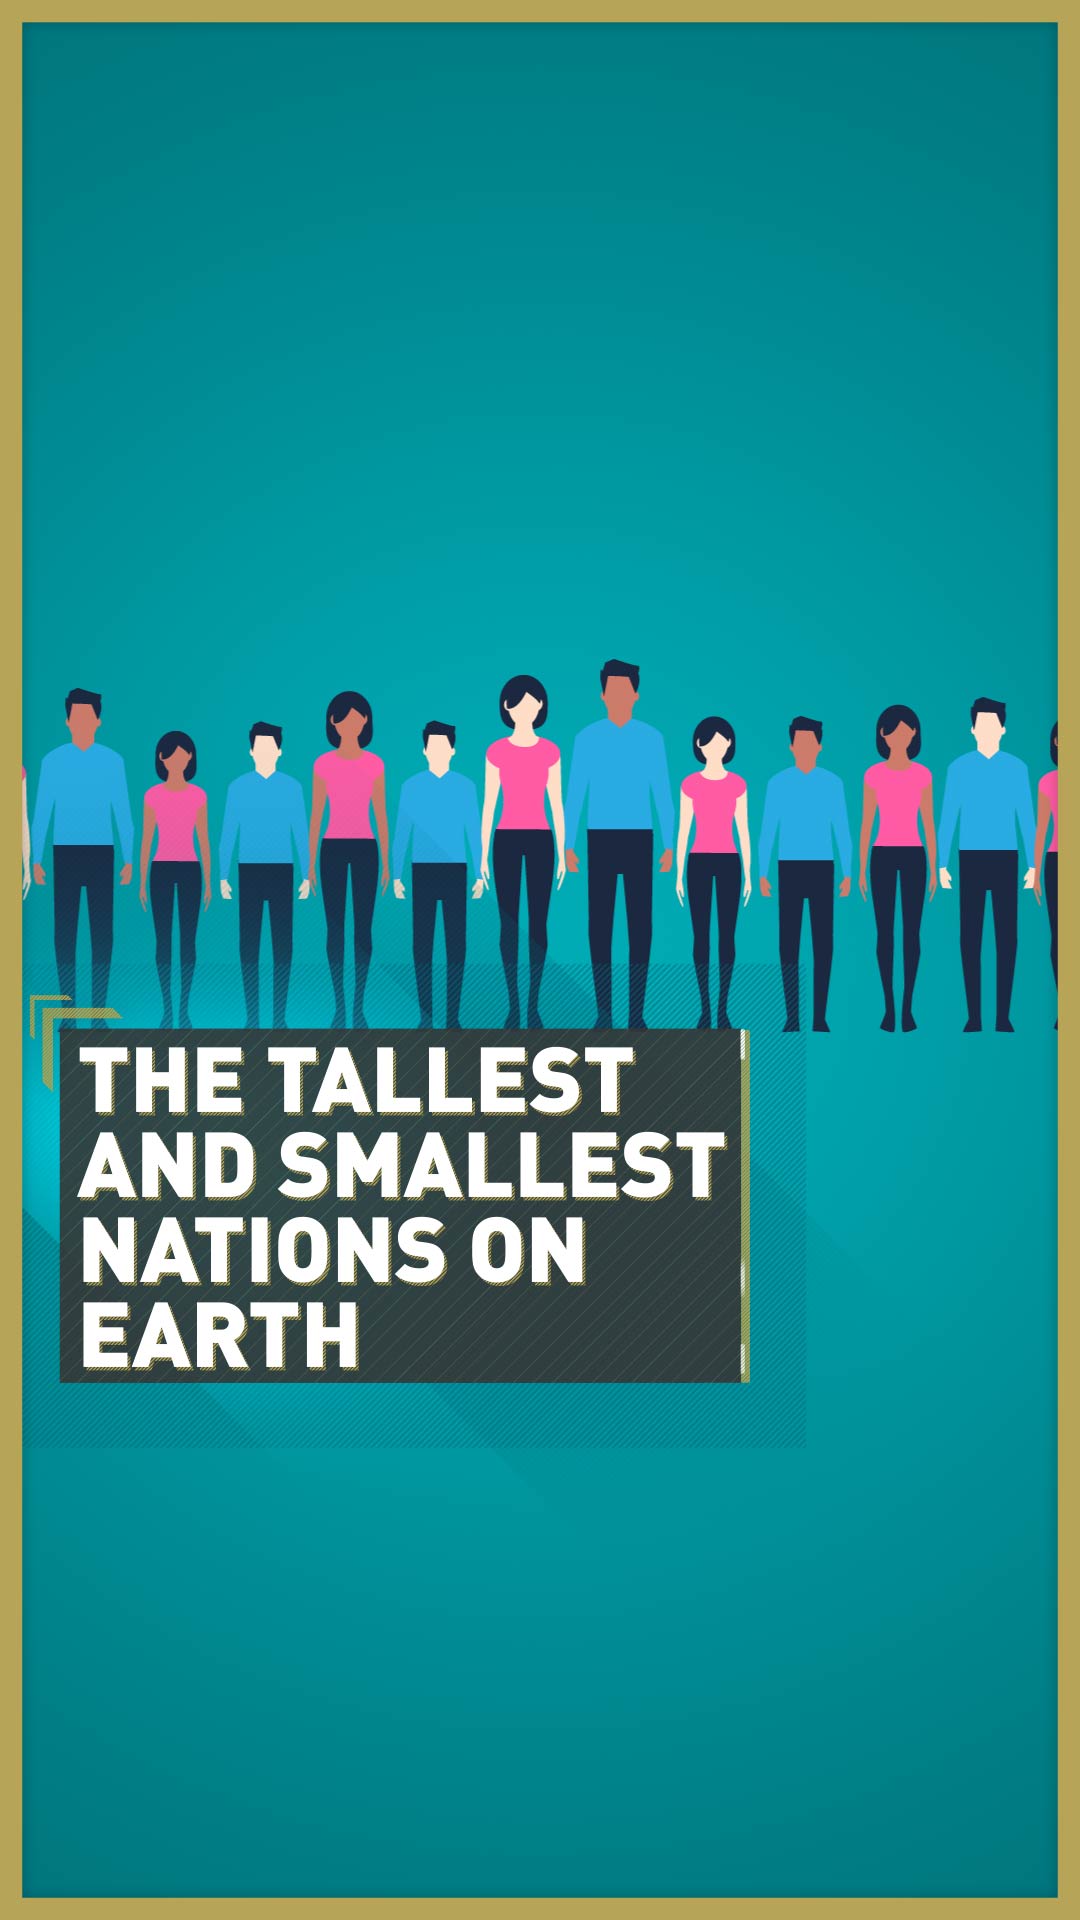 The Culture With The Tallest People in World